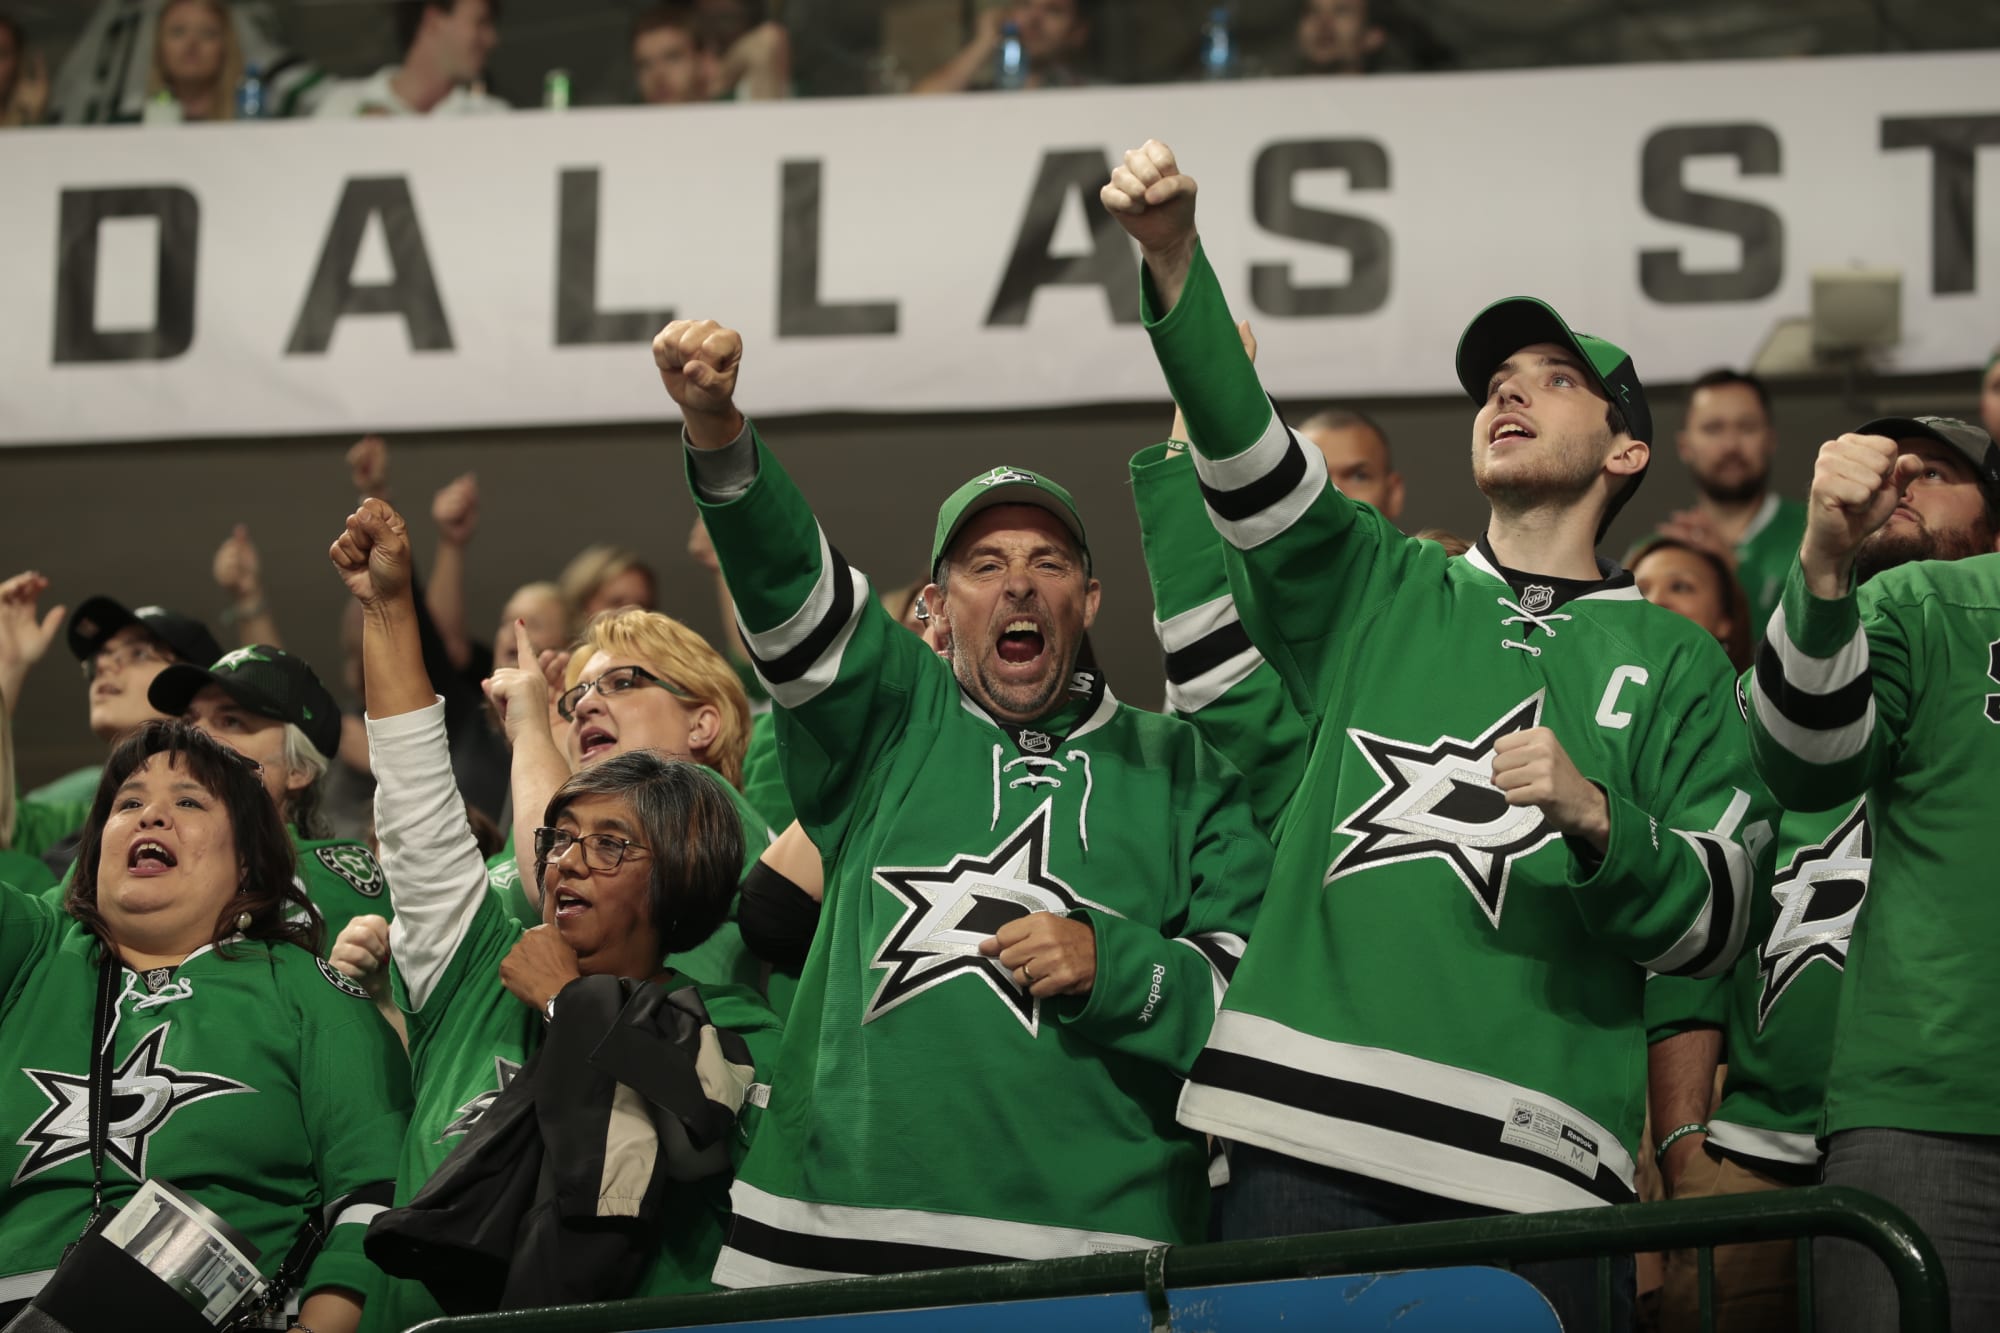 Stanley Cup Final guide for Stars fans: Enemies of Dallas' past